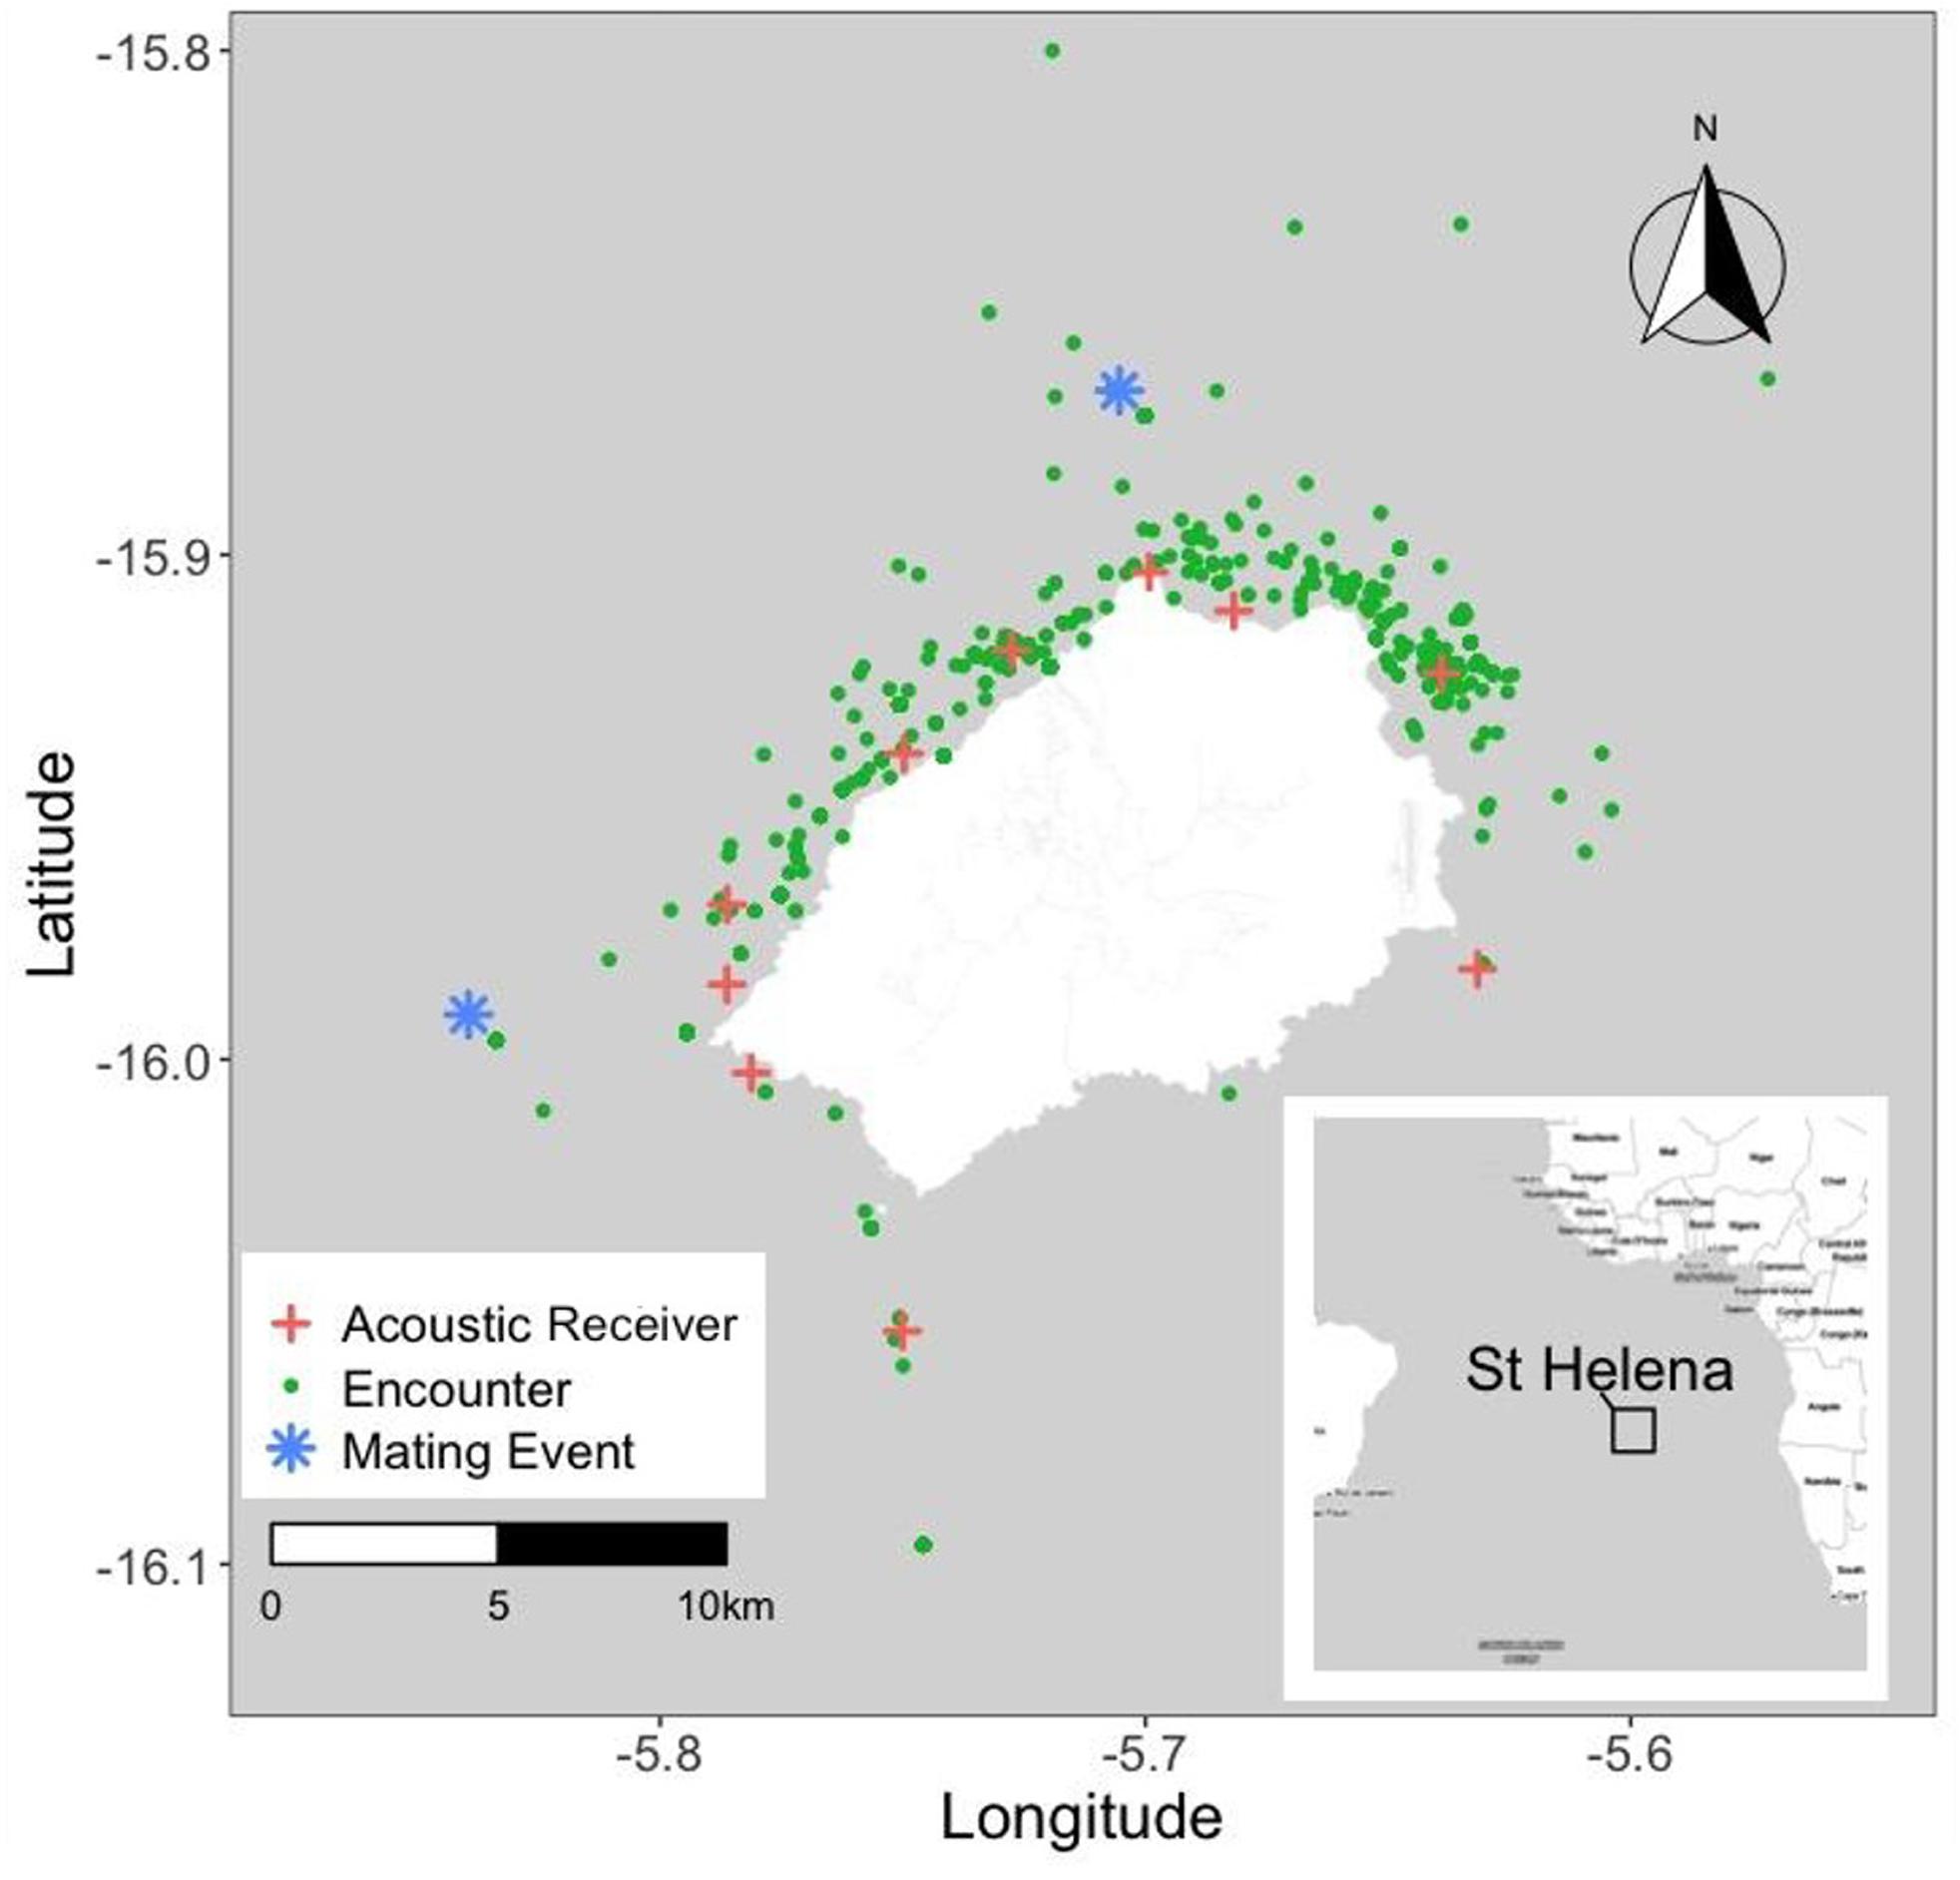 St Helena & whale shark sightings from 1999 to 2019